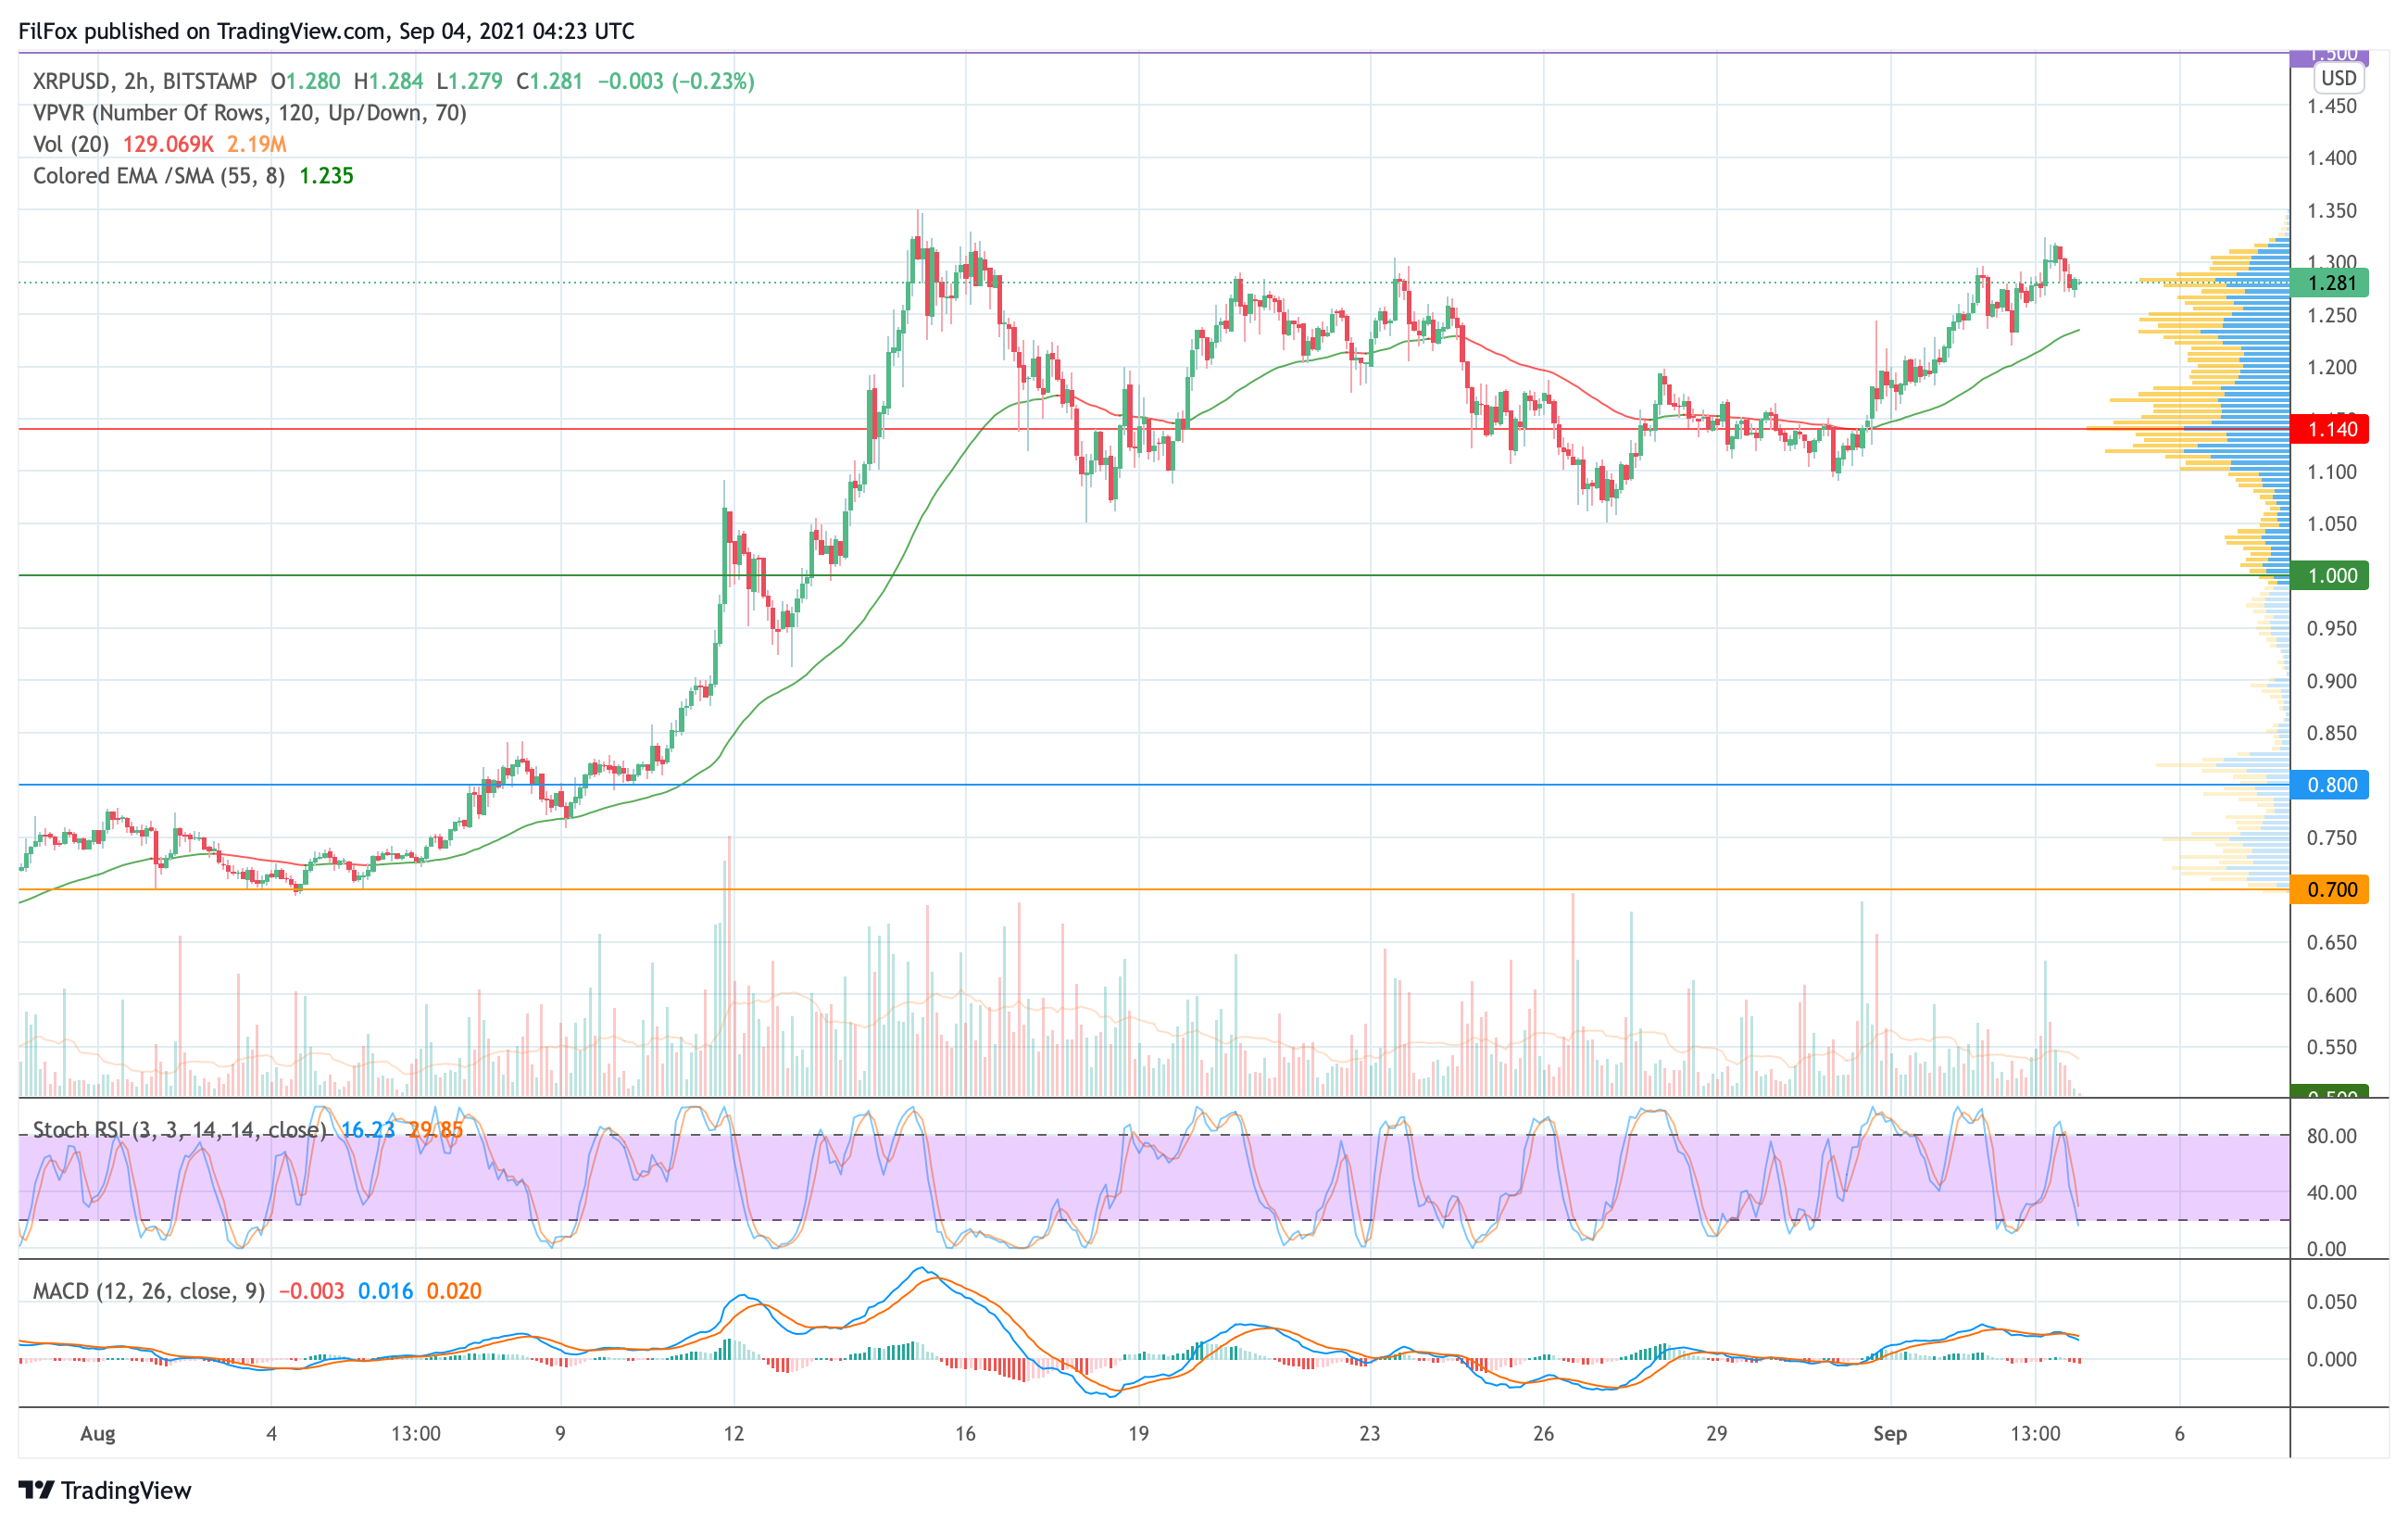 Analysis of prices for Bitcoin, Ethereum, XRP for 09/04/2021